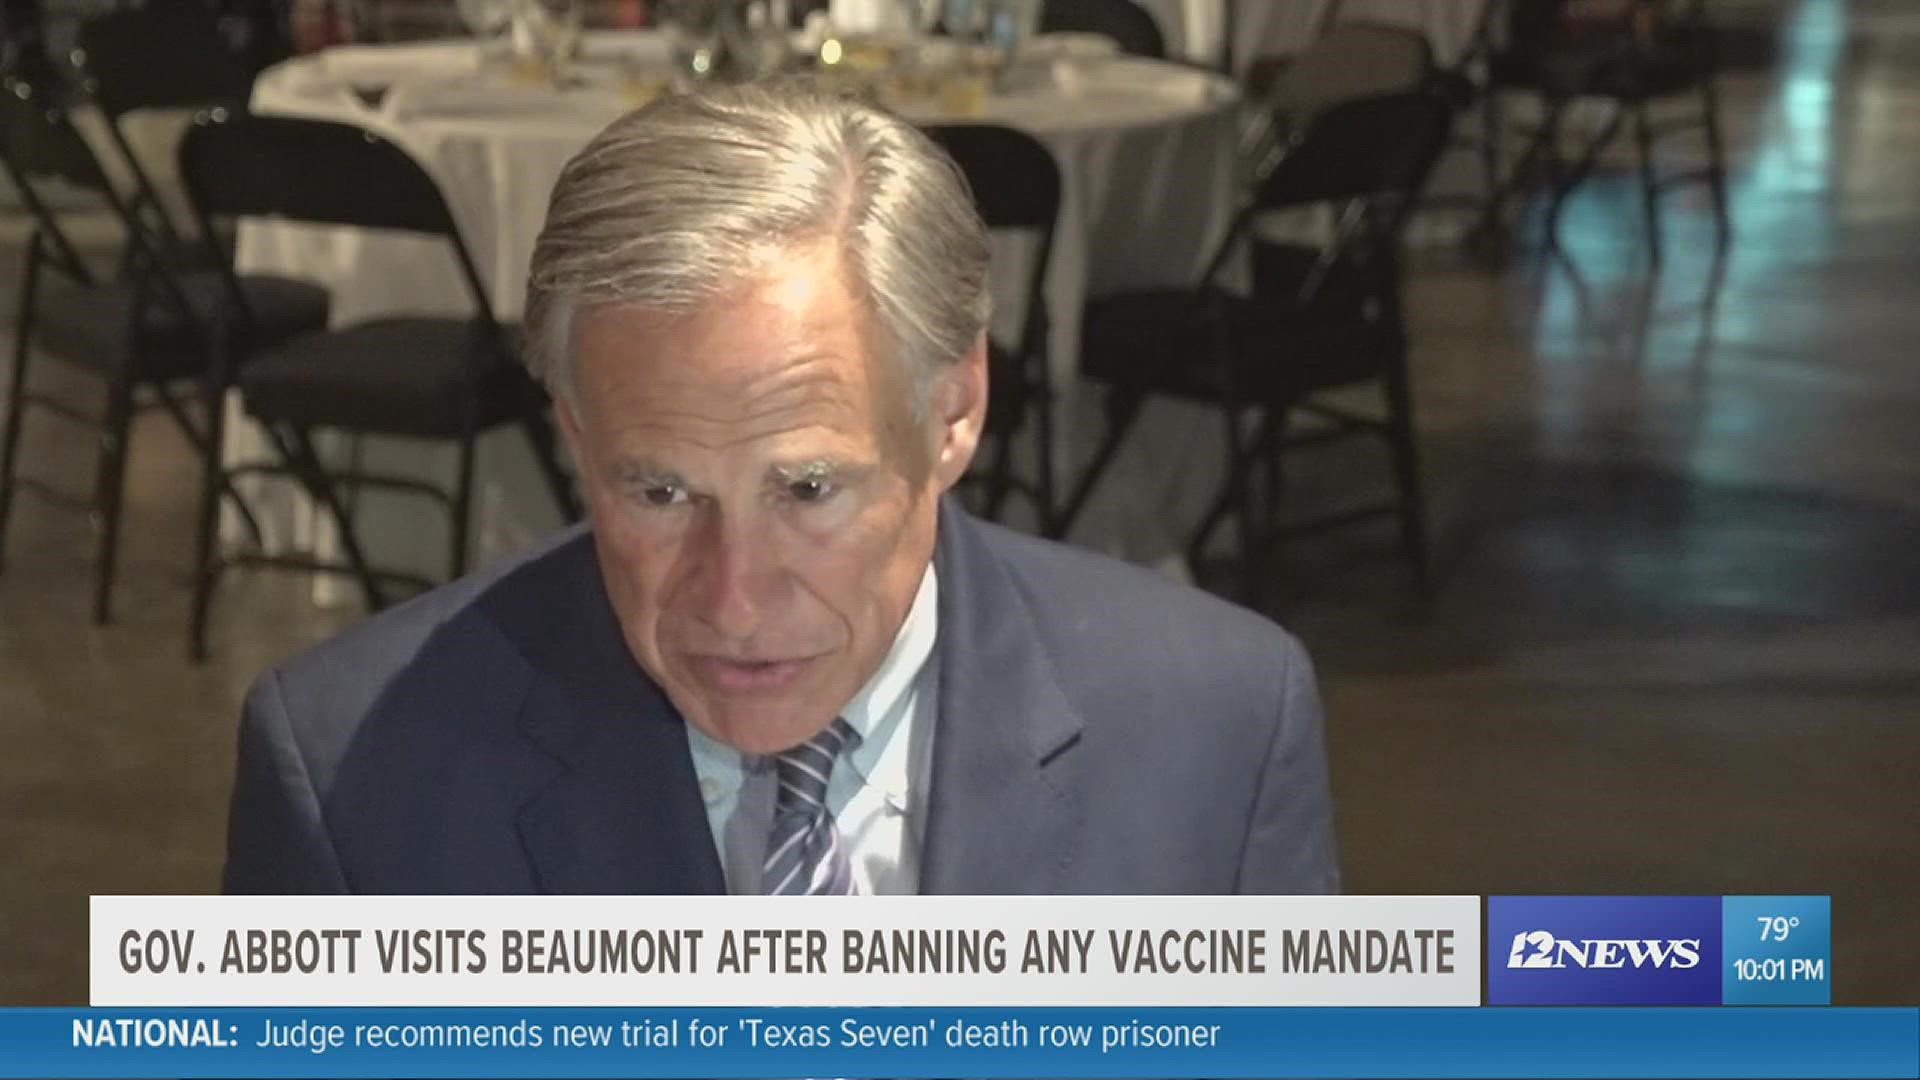 The meeting came less than 24 hours after the executive order that bans vaccine mandates.